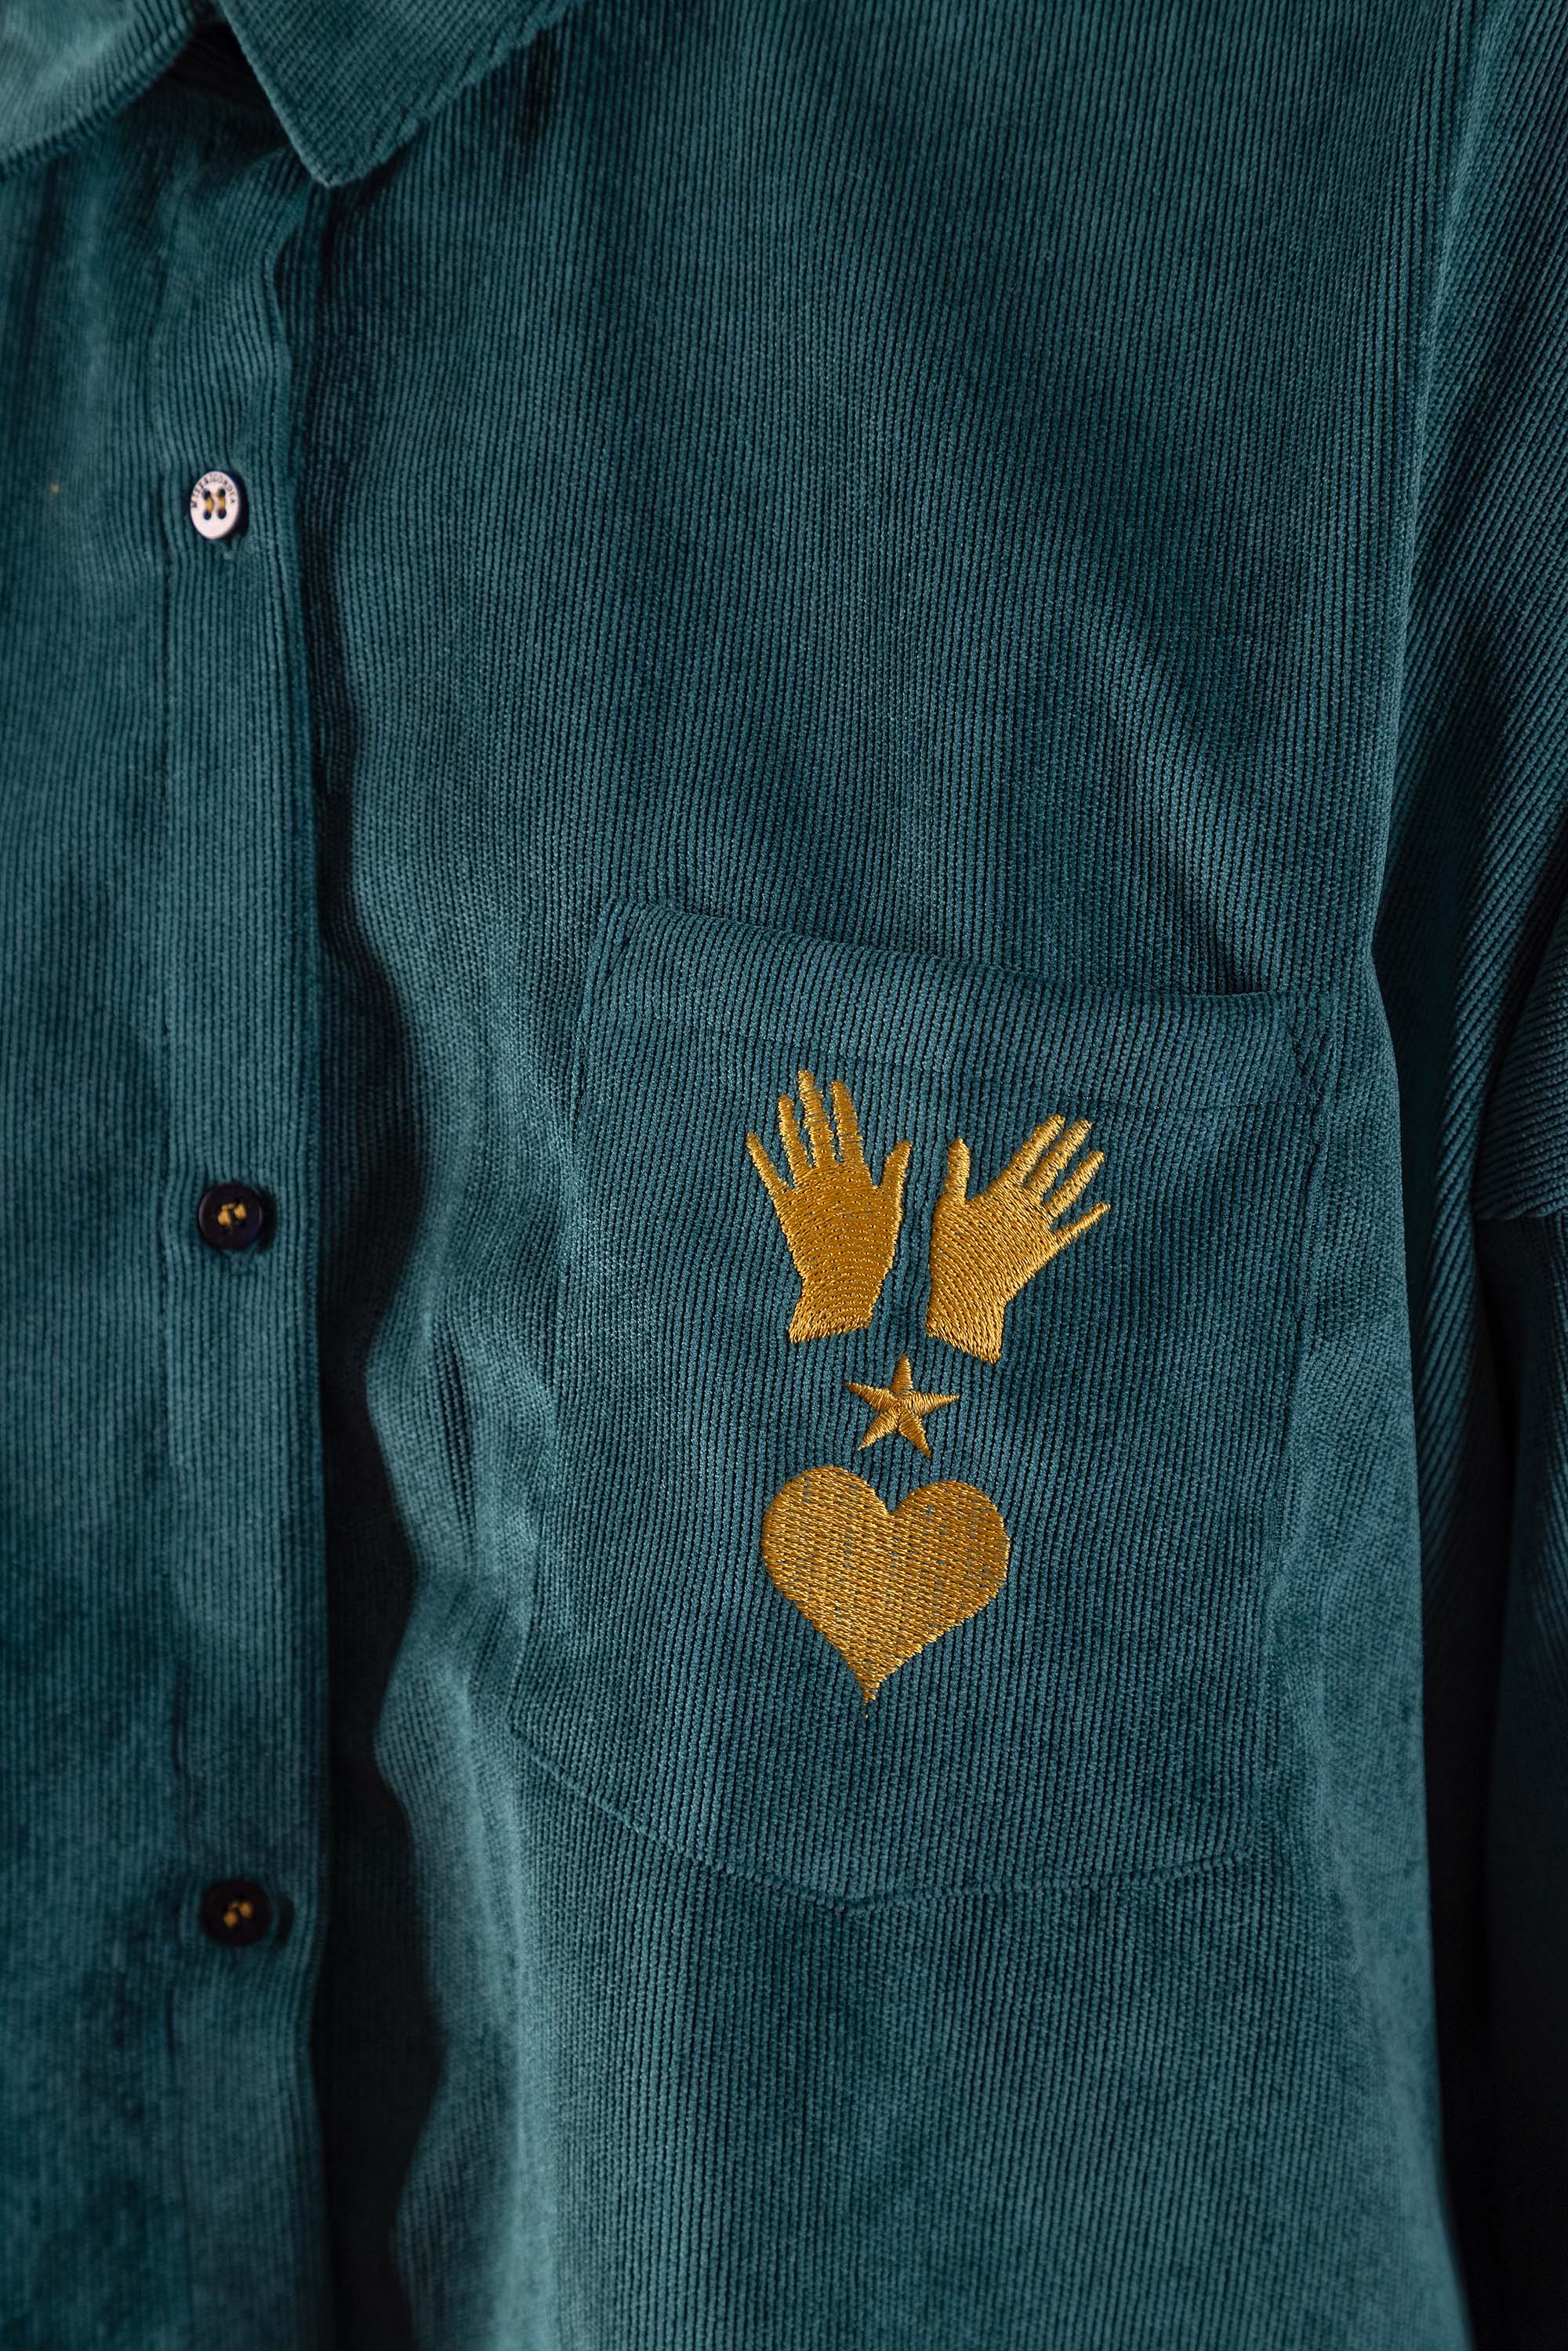 Women's shirt in bottle green polyester velvet embroidered with manos, esperitu y corazon in yellow on the chest pocket